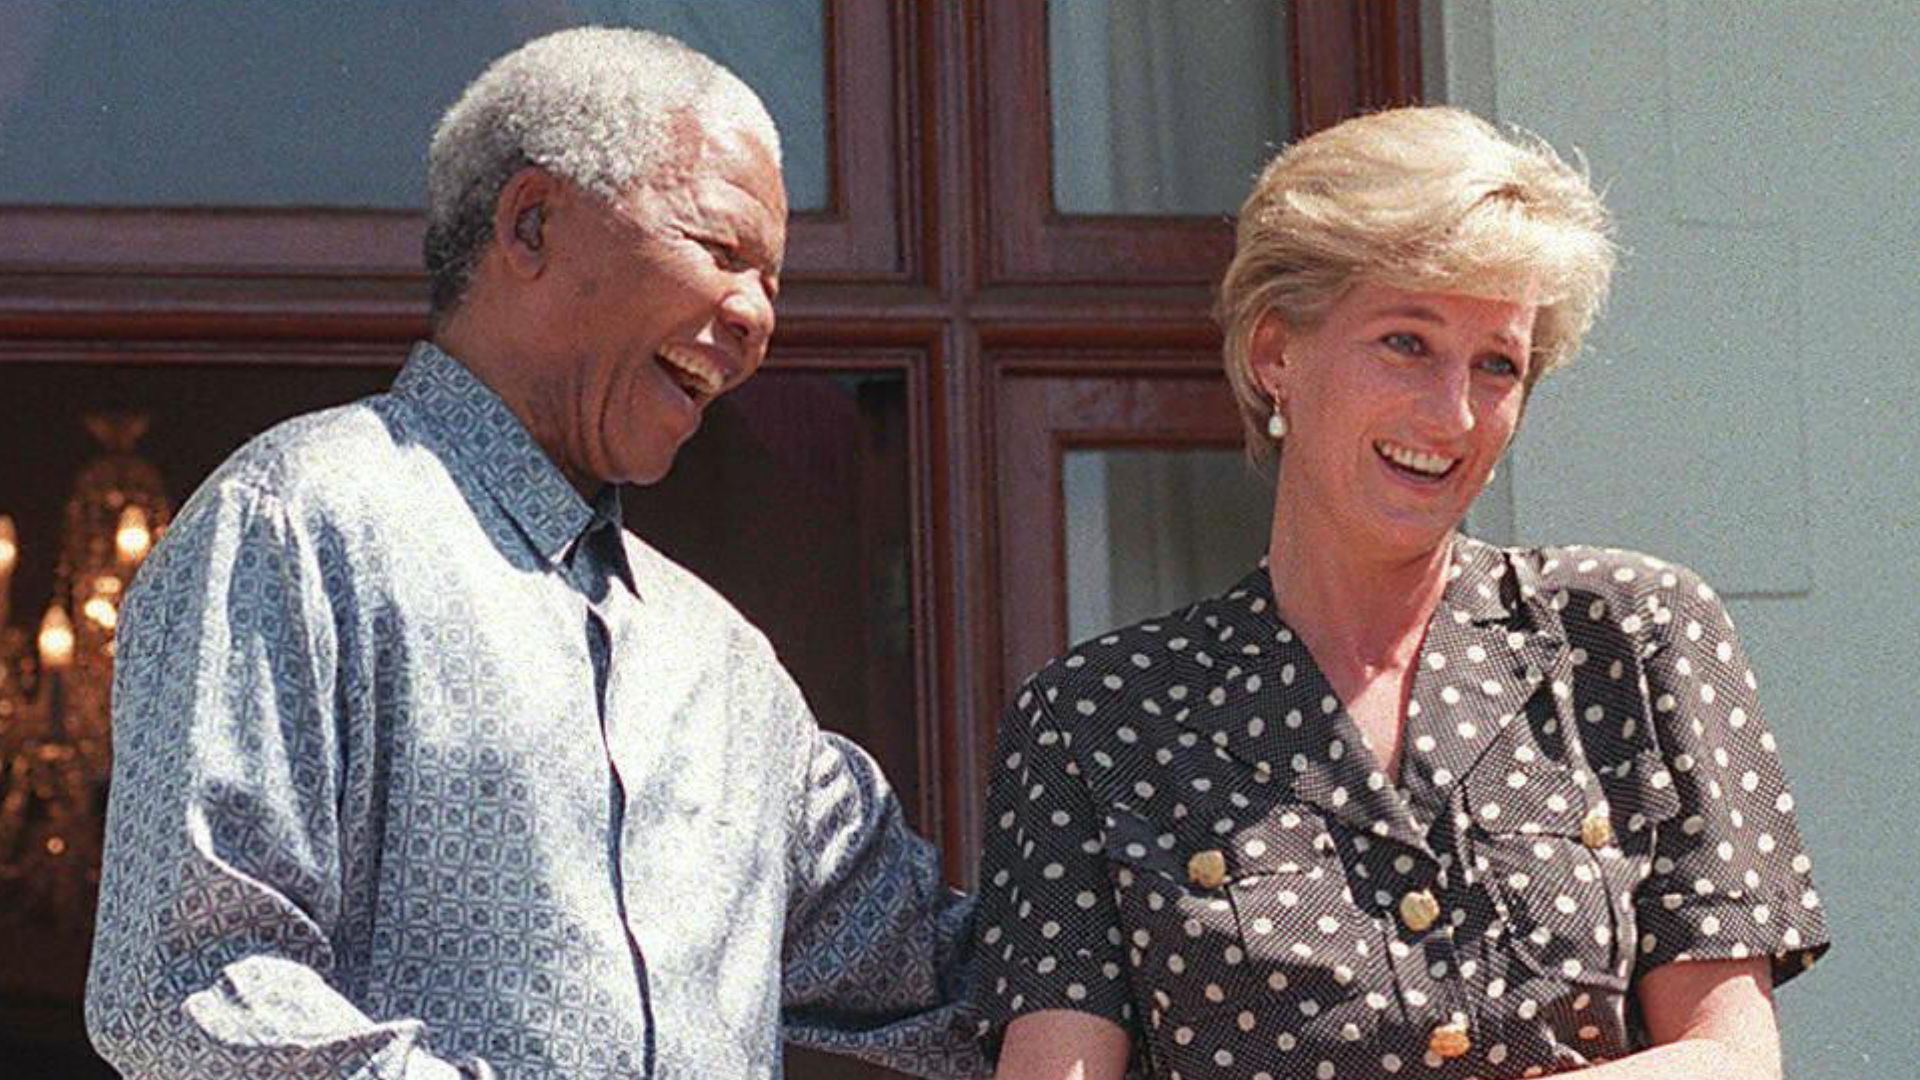 <p>                     Diana was extremely familiar with Cape Town since her brother Charles had relocated to the South African city to escape media attention in 1995. She loved spending time in Cape Town and is seen here on one of the more memorable trips where she met with the late South African President Nelson Mandela. Diana visited Nelson Mandela at his home where this image was captured in 1997. It’s a moment that creates warm memories for Prince Harry, who later said of the image which hangs on his wall, "When I first looked at the photo, straight away what jumped out was the joy on my mother’s face. The playfulness, cheekiness, even. Pure delight to be in communion with another soul so committed to serving humanity."                   </p>